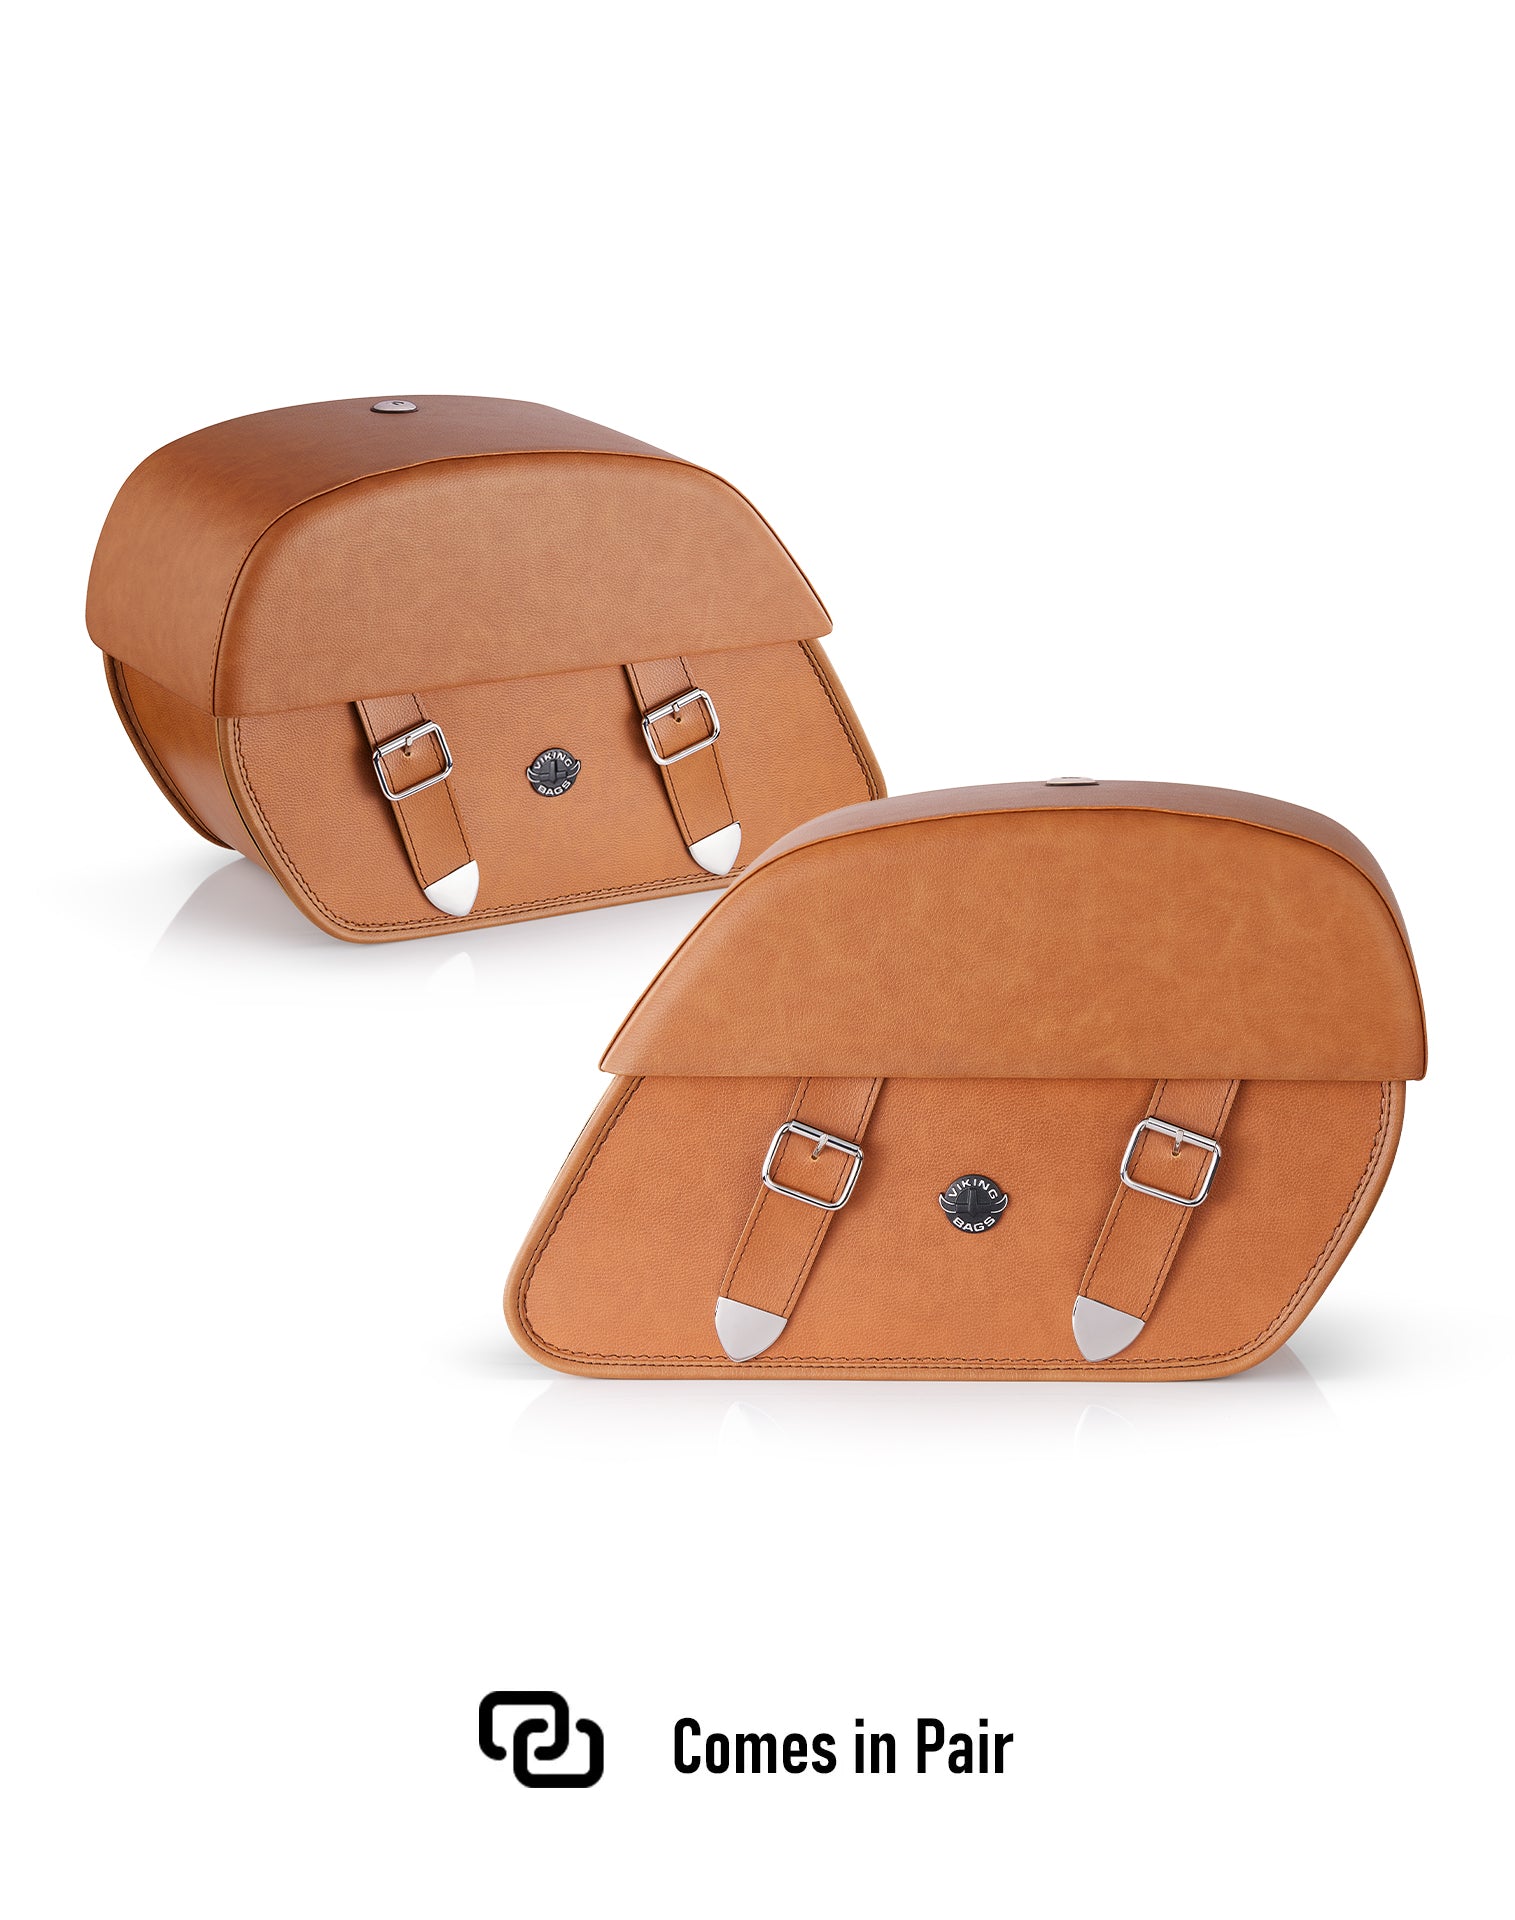 33L - Baelor Brown Large Leather Saddlebags For Harley Softail Fat Boy FLFB/S Pair